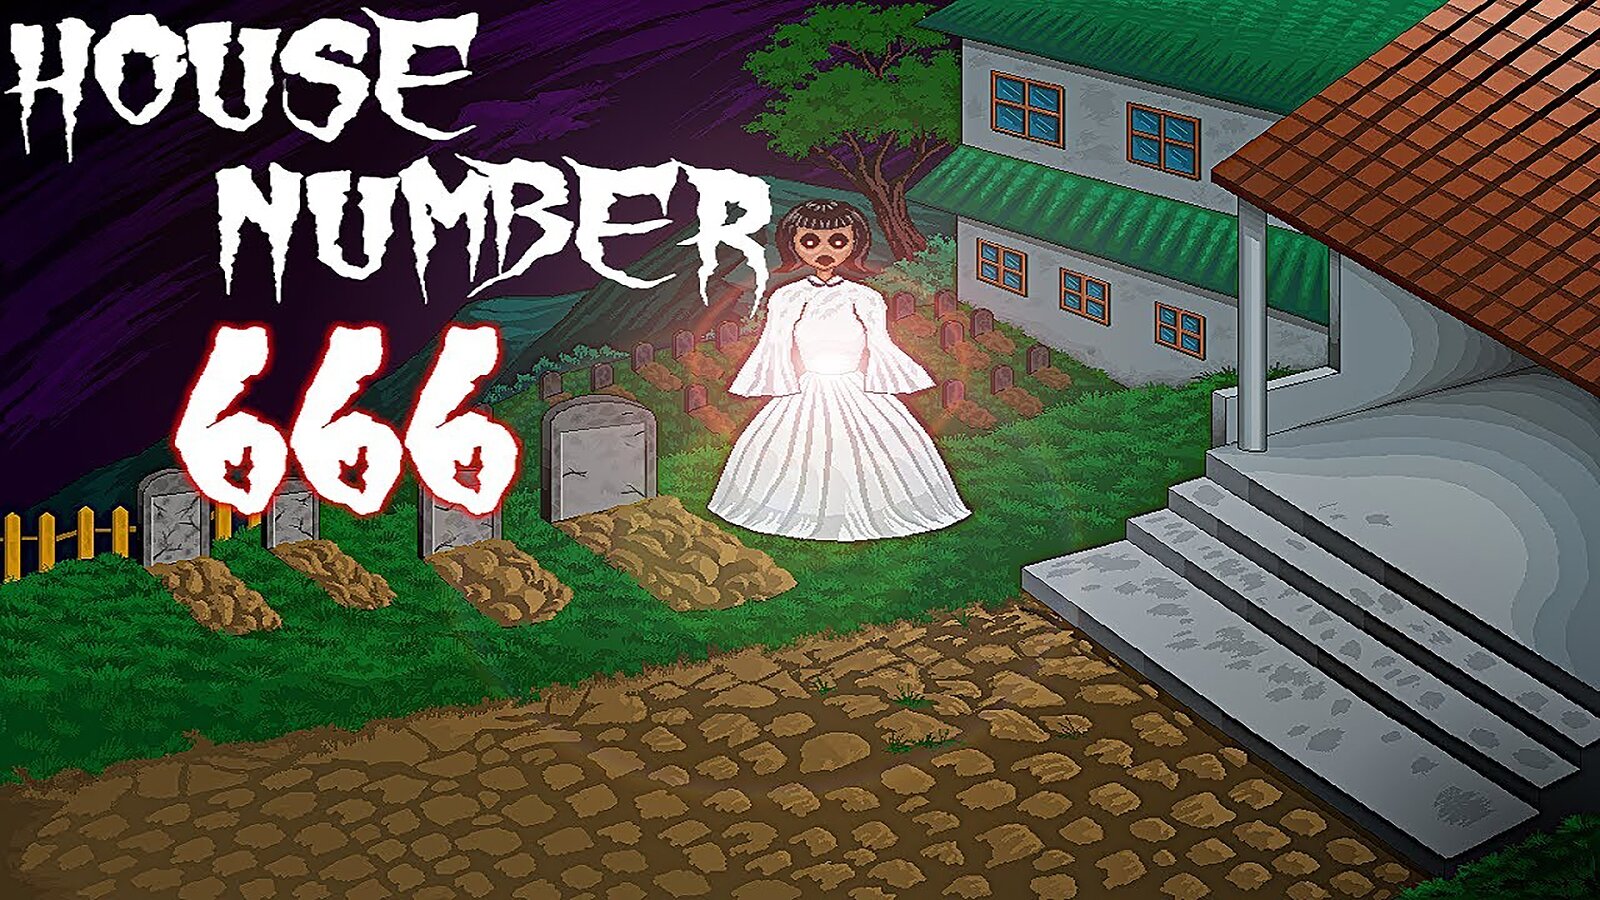 House Number 666